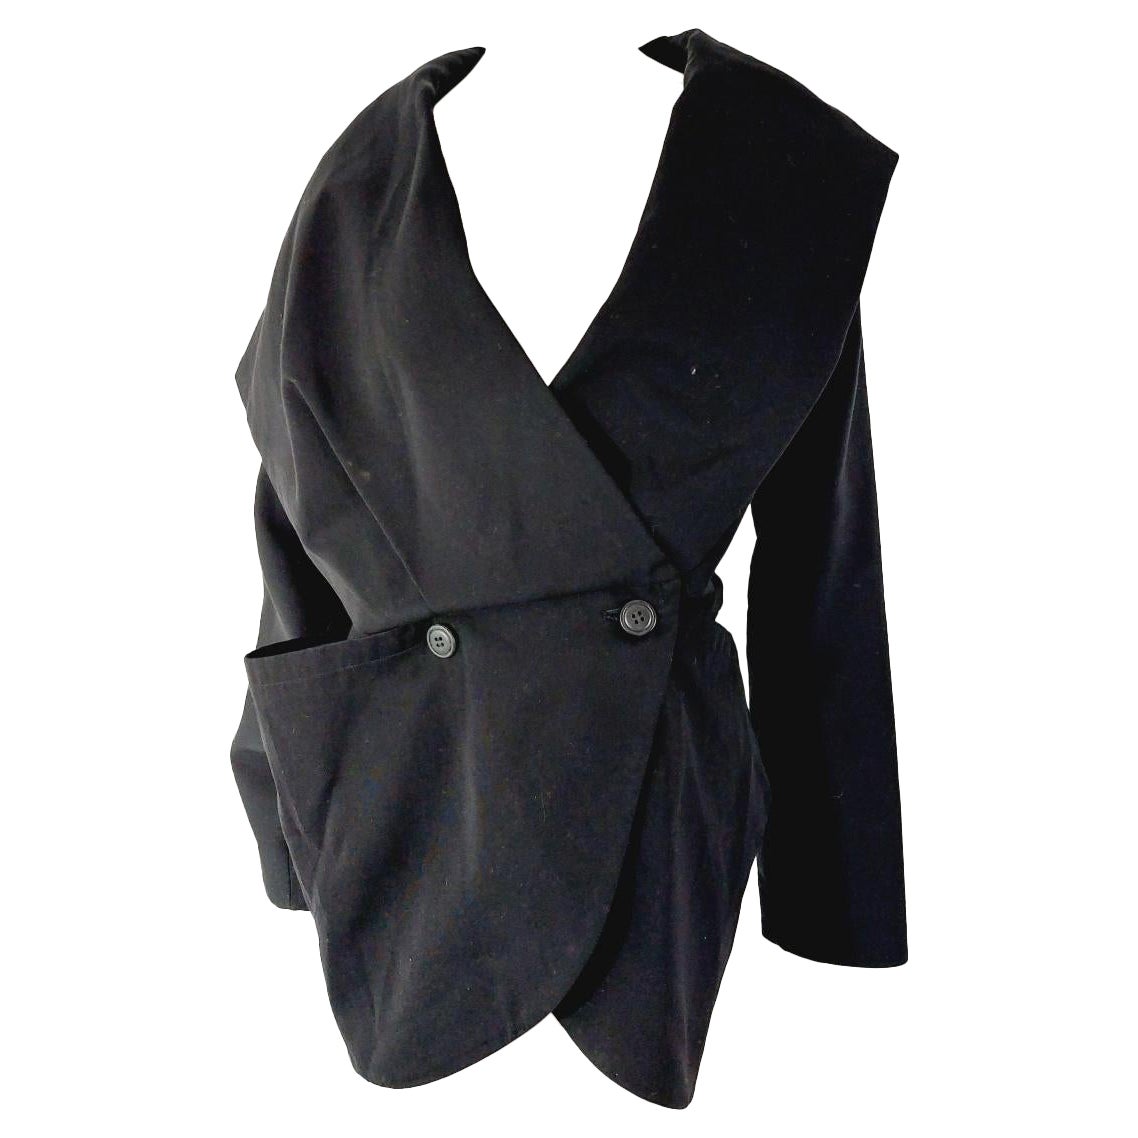 Issey Miyake Exaggerated Dramatic Asymmetric Silhouette Formal Coat Jacket For Sale